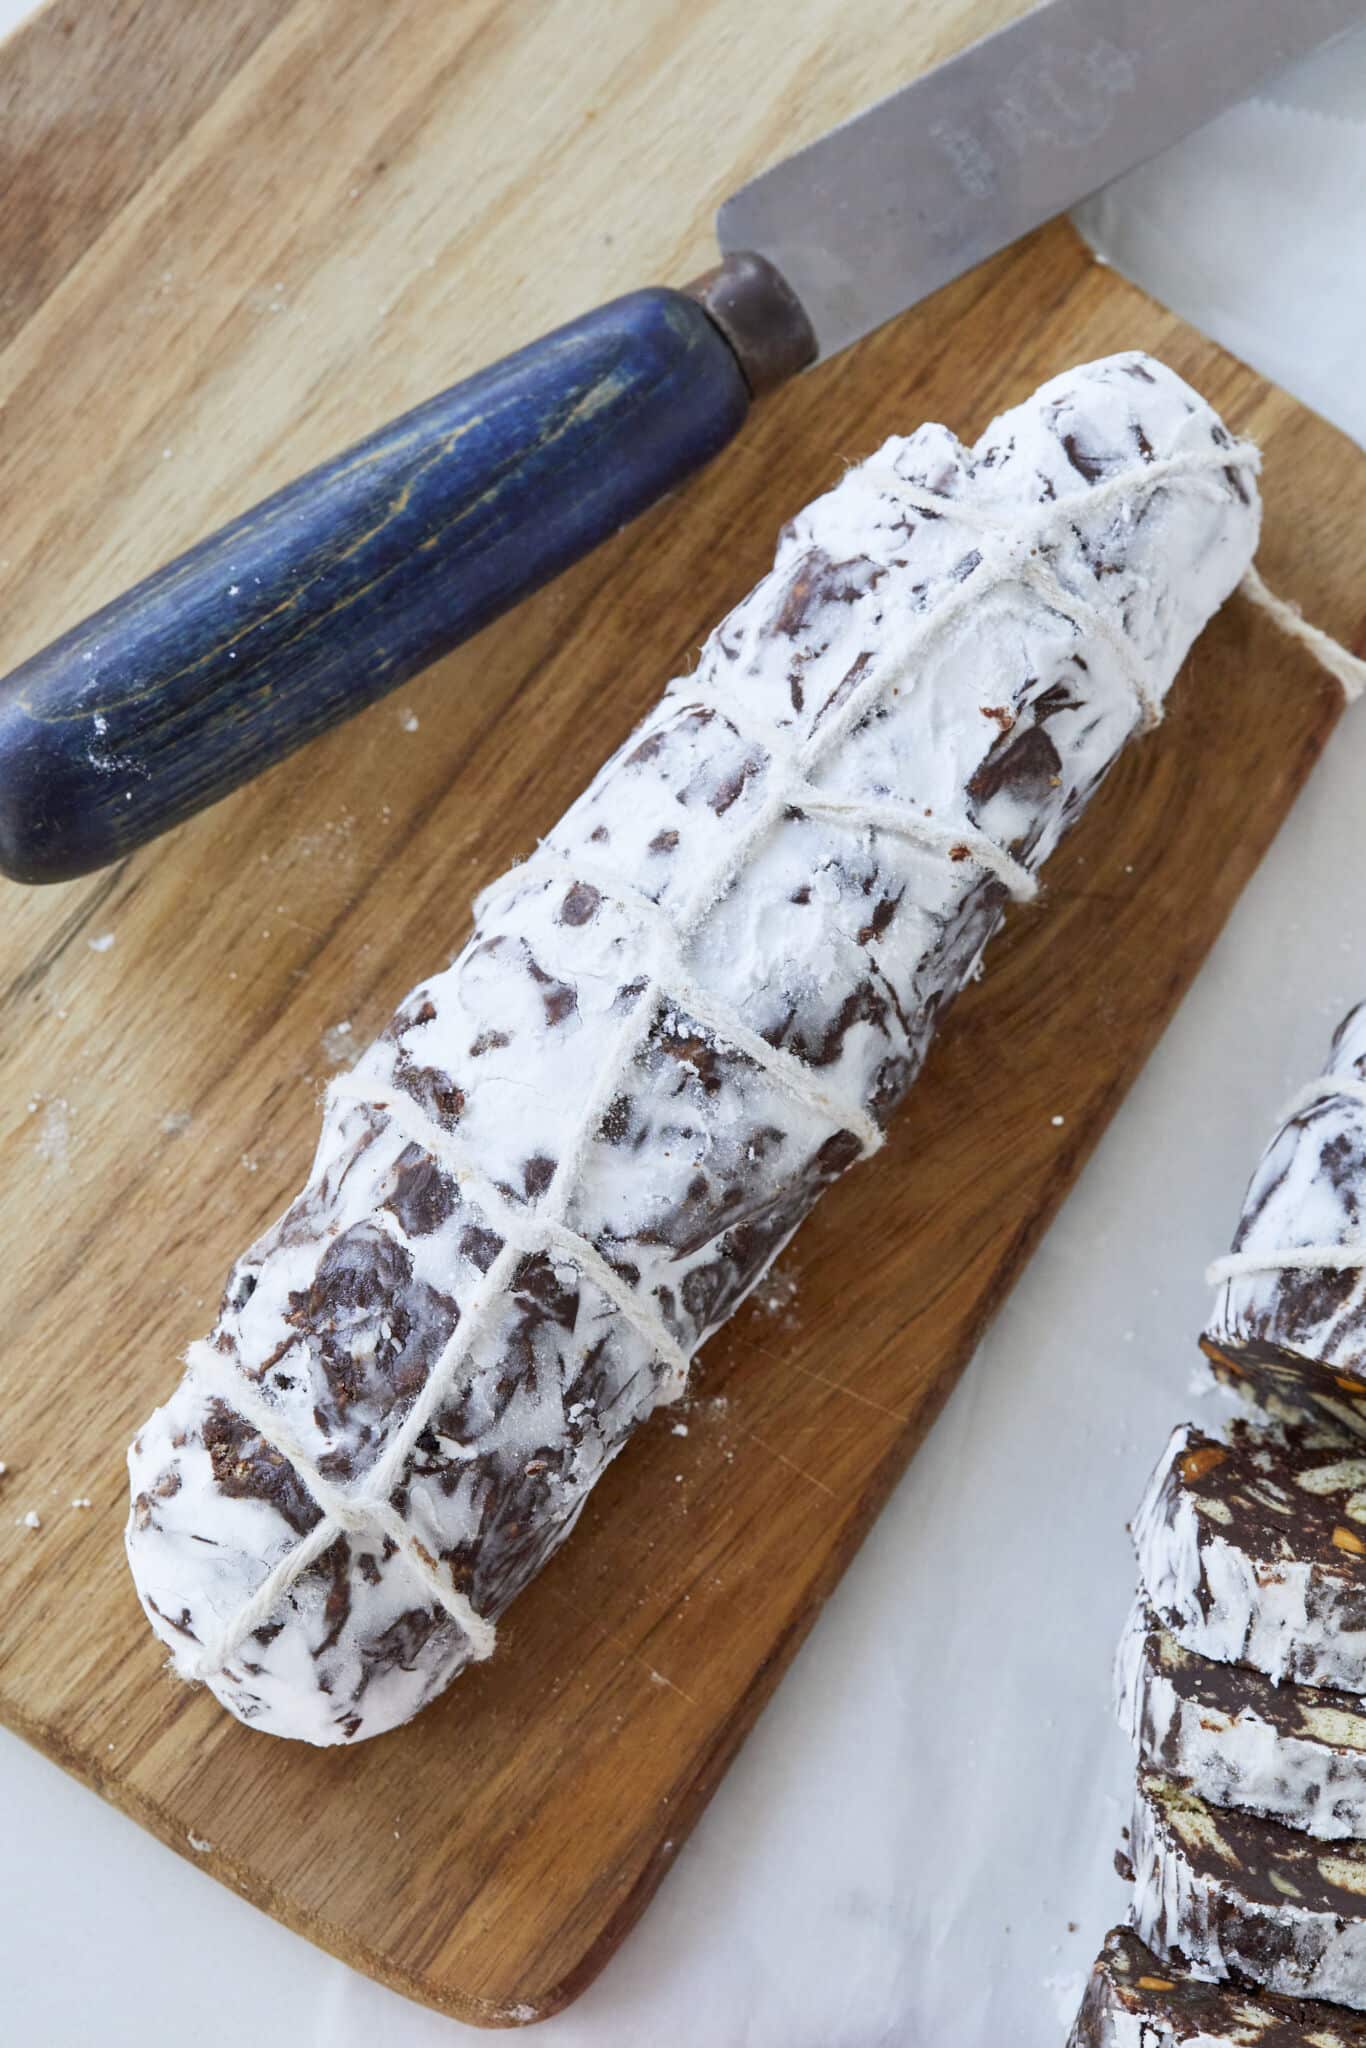 Italian Chocolate Biscuit Cake , also known as chocolate salami, is shaped into a log, resembling a salami, and is rolled in powdered sugar or cocoa powder to simulate the look of cured meat wrapped with twine around. 